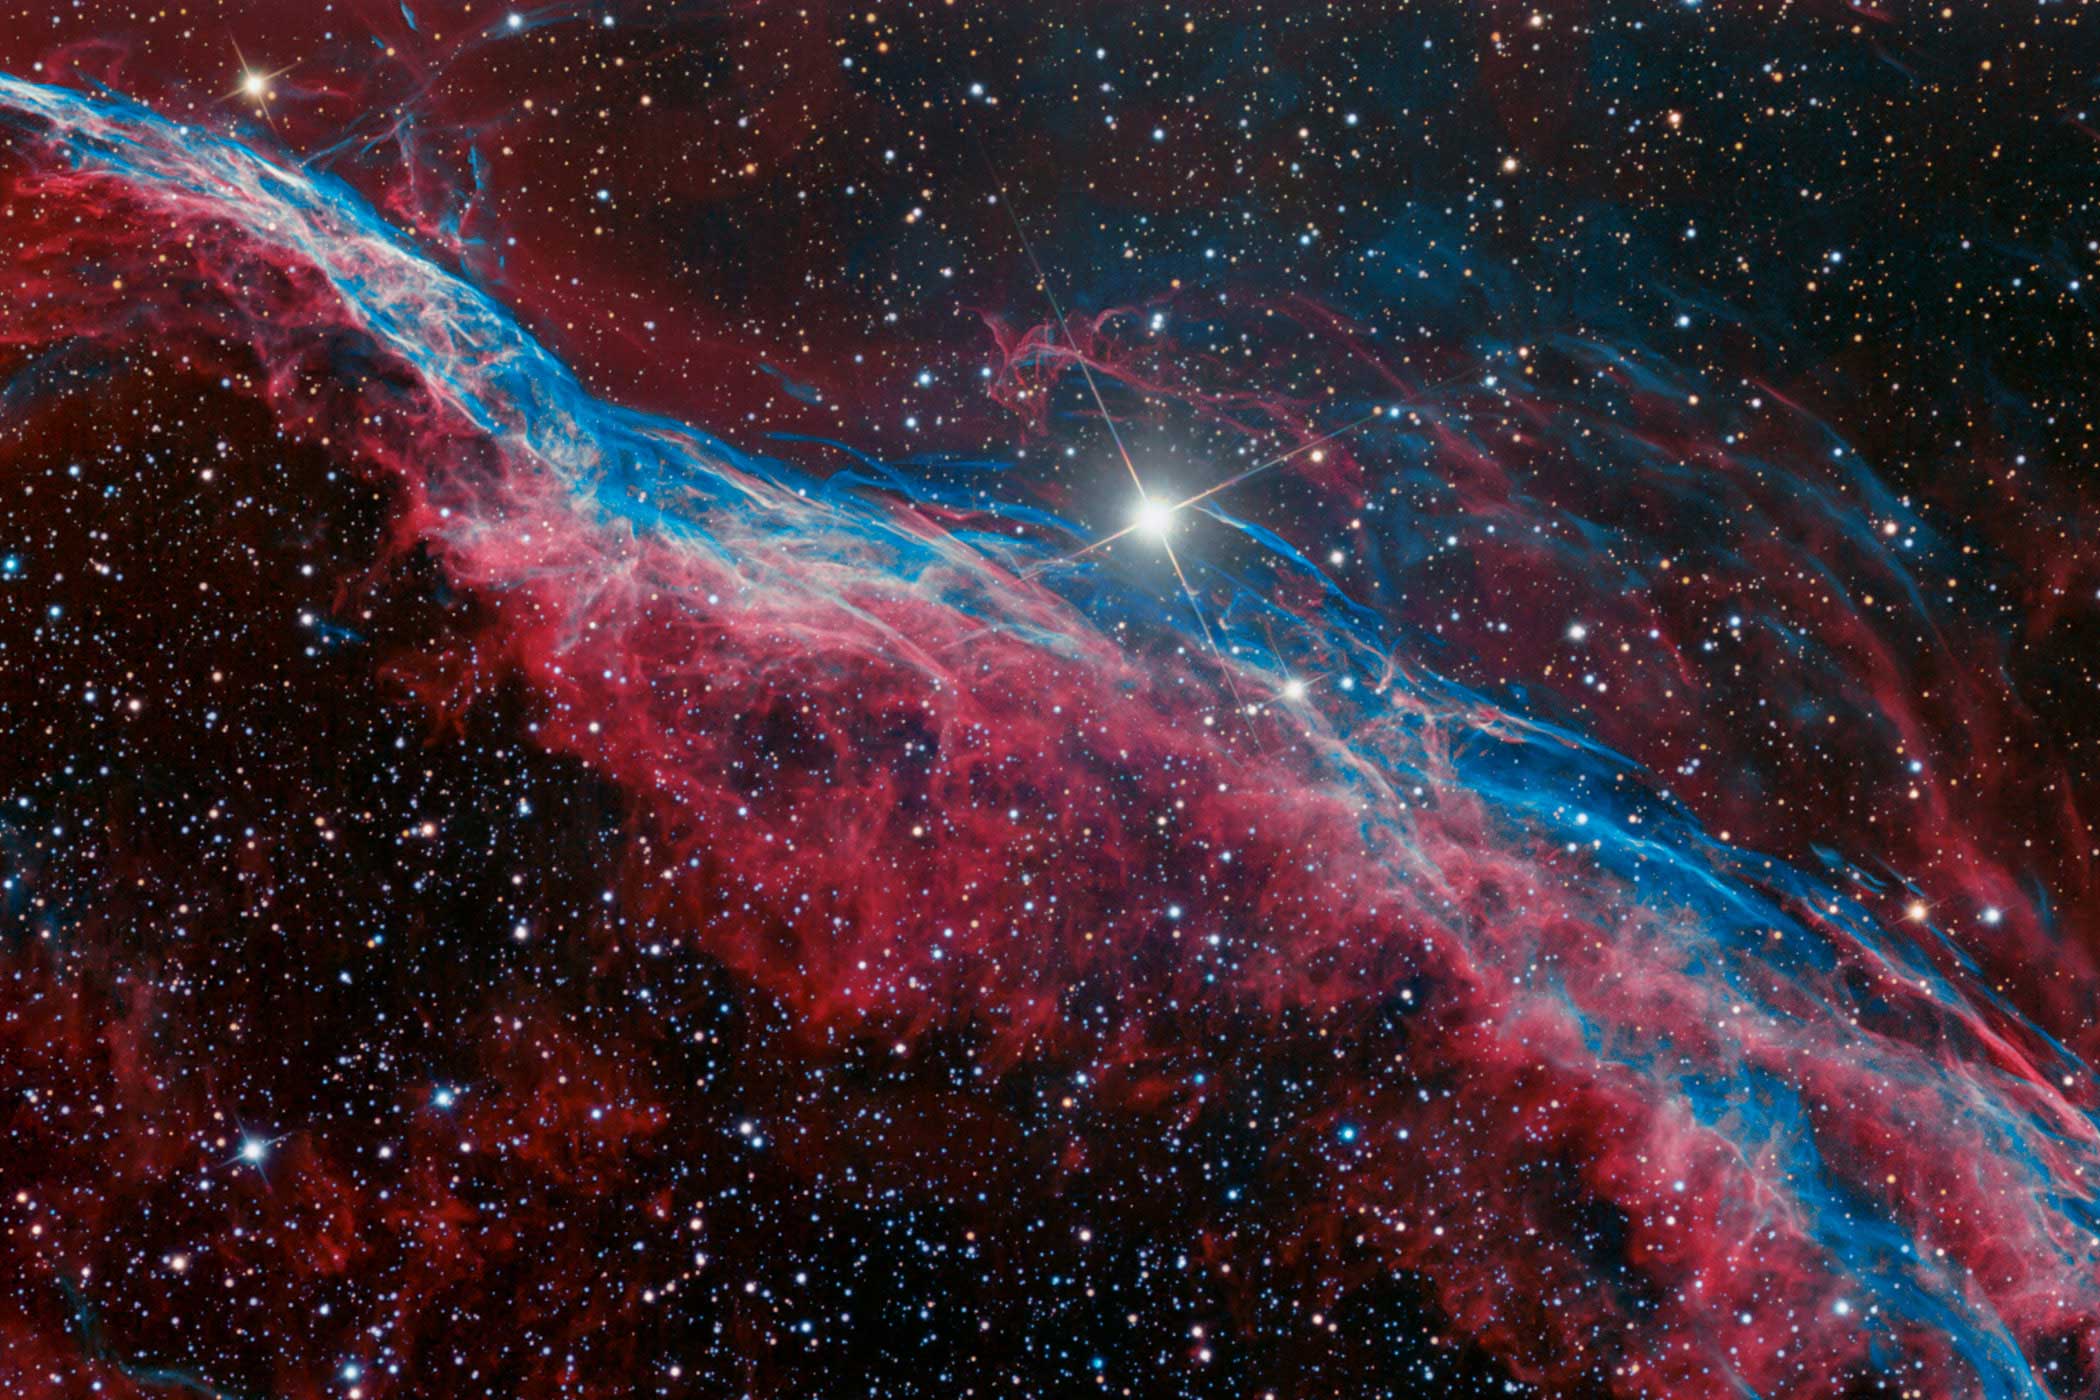 Part of the Veil Nebula, the Witch's Broom is the glowing debris from a supernova explosion. It's what's left over after the violent death of a massive star. Although the supernova occurred several thousand years ago, the gaseous debris is still expanding outwards, producing this vast cloud-like structure.